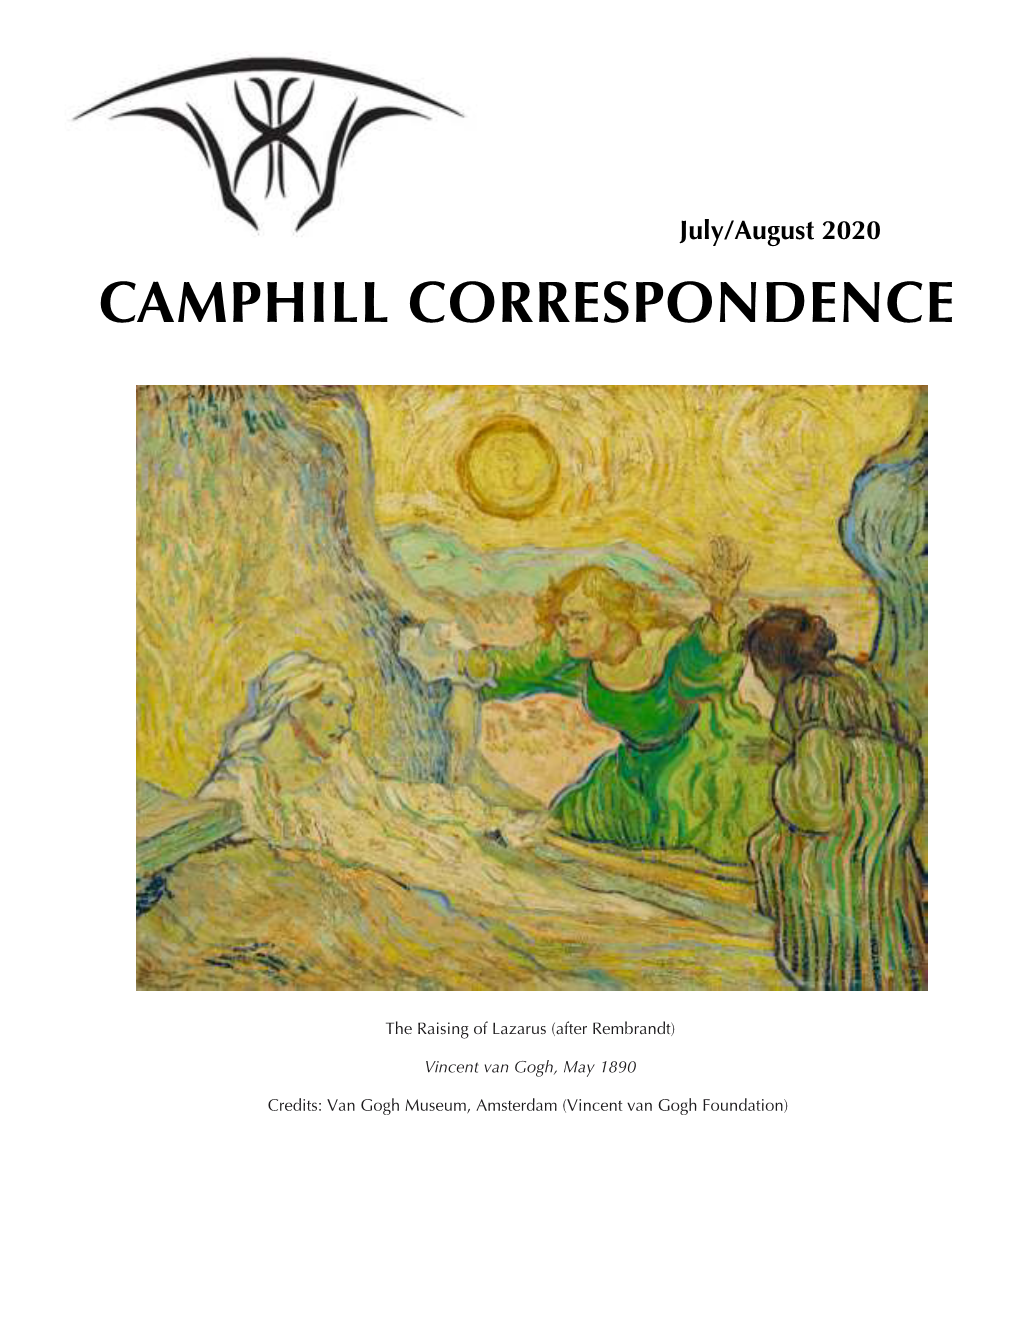 Camphill Correspondence July/August 2020